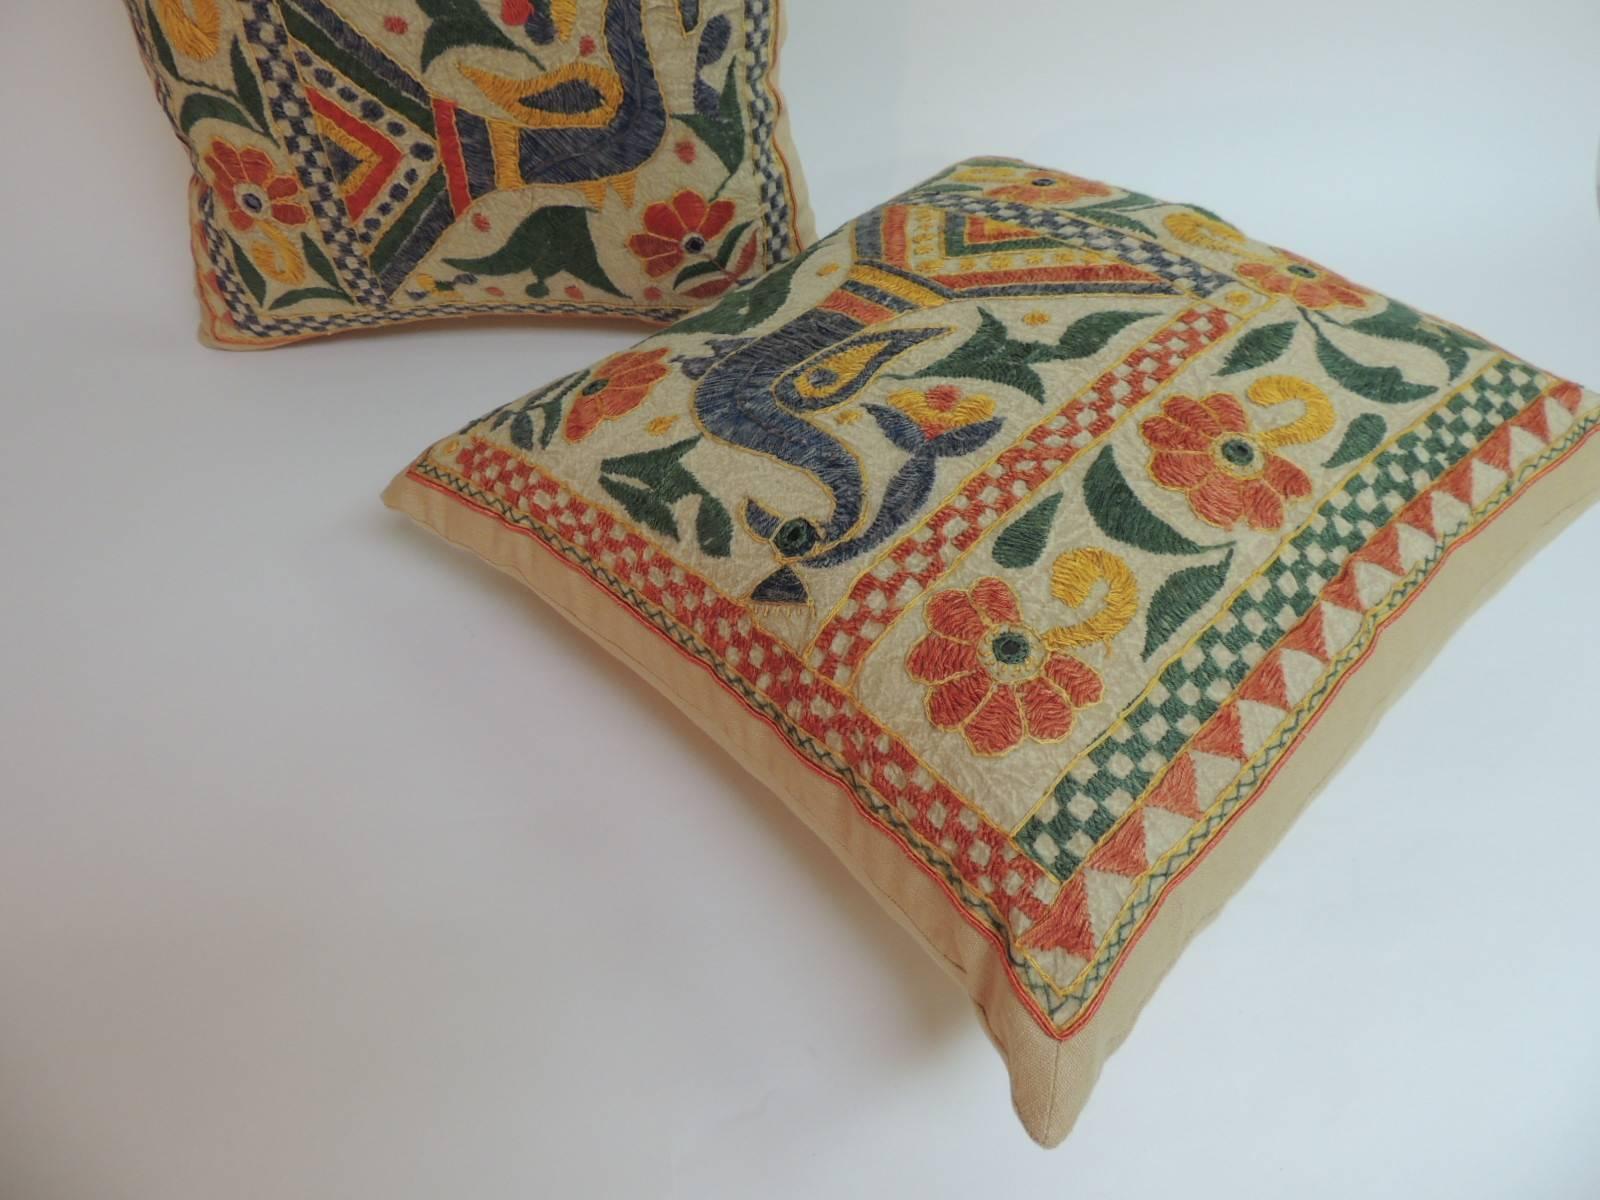 Hand-Crafted Pair of 19th Century Indian Hand Embroidery Decorative Pillows